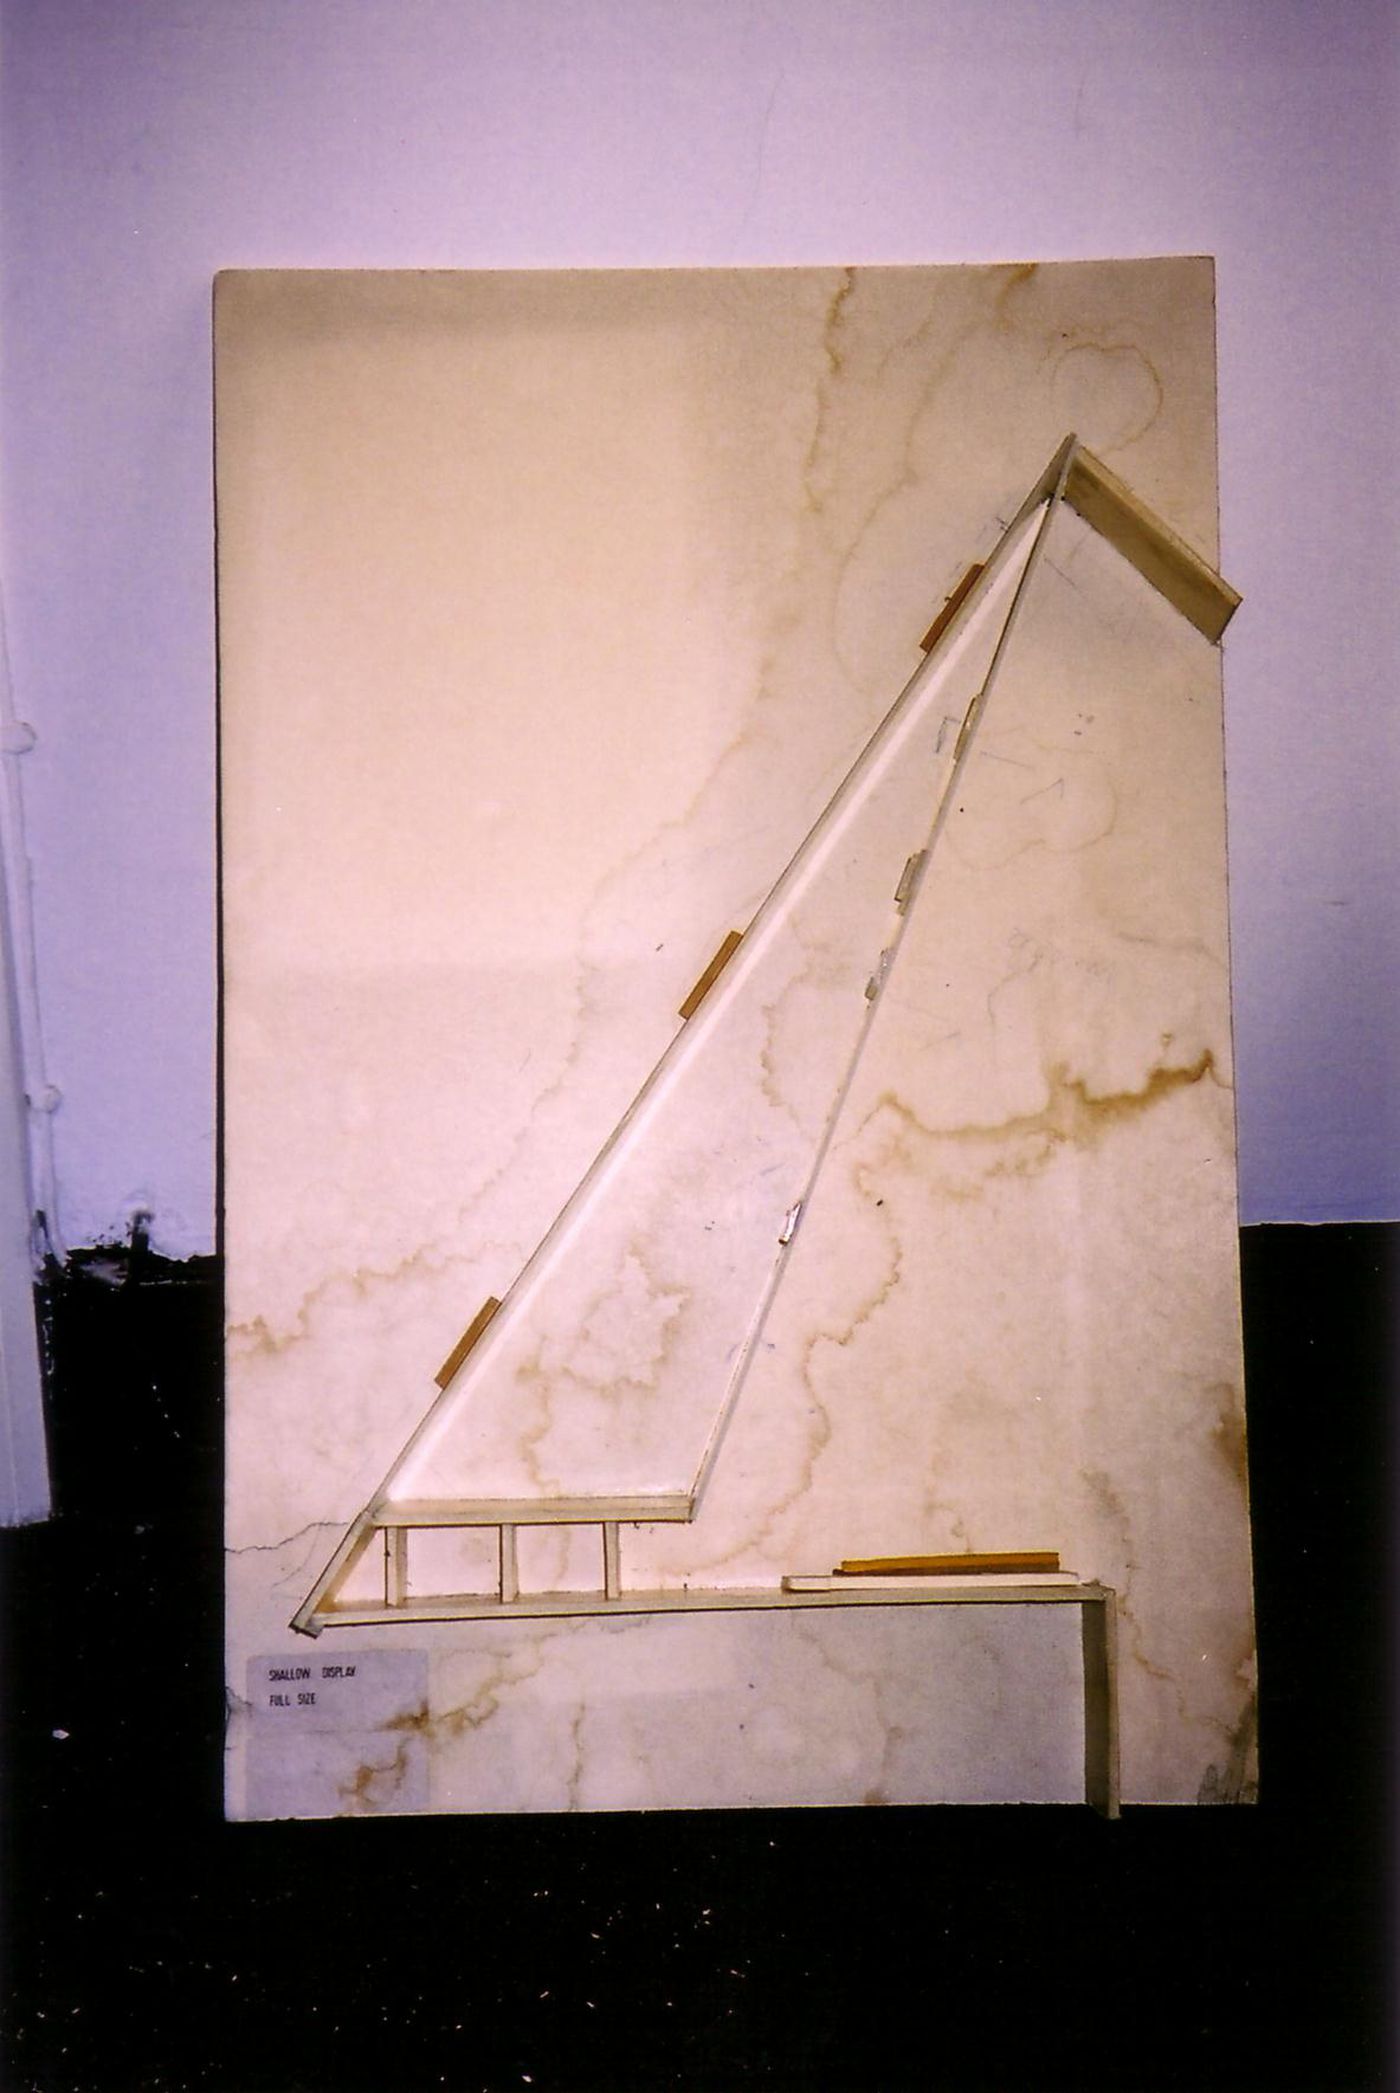 Full-scale cross section model of shallow area of display case